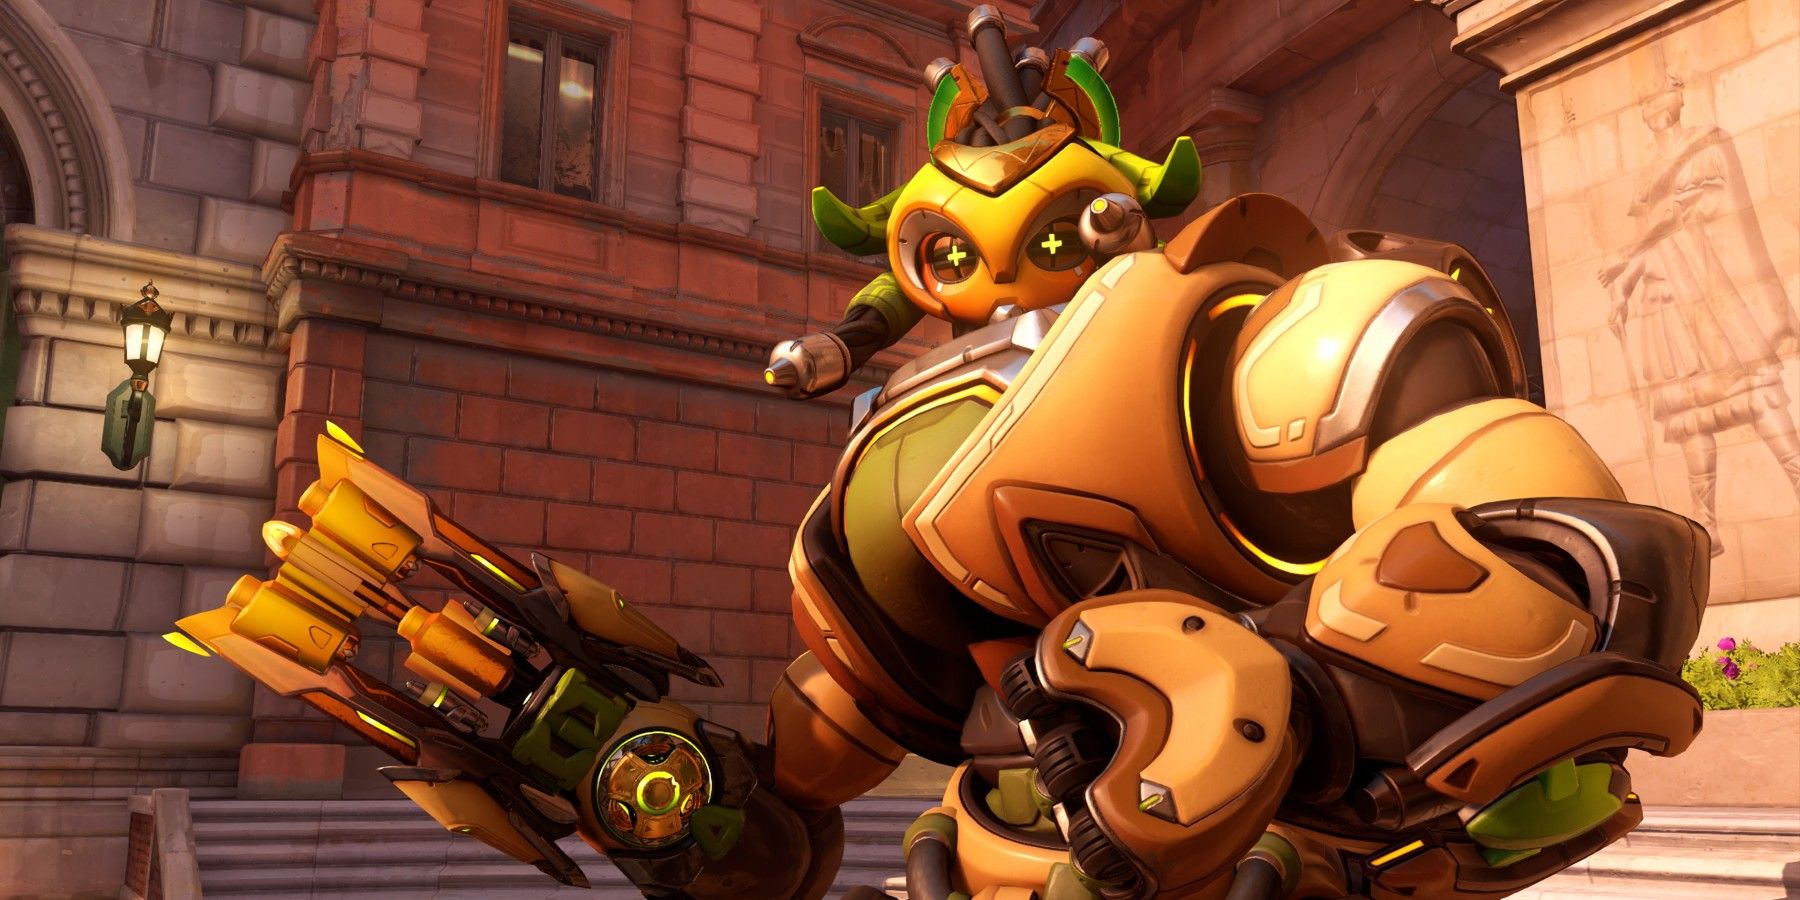 Overwatch 2 Clip Shows Orisa 'Teleporting' When Using Her Ultimate Attack